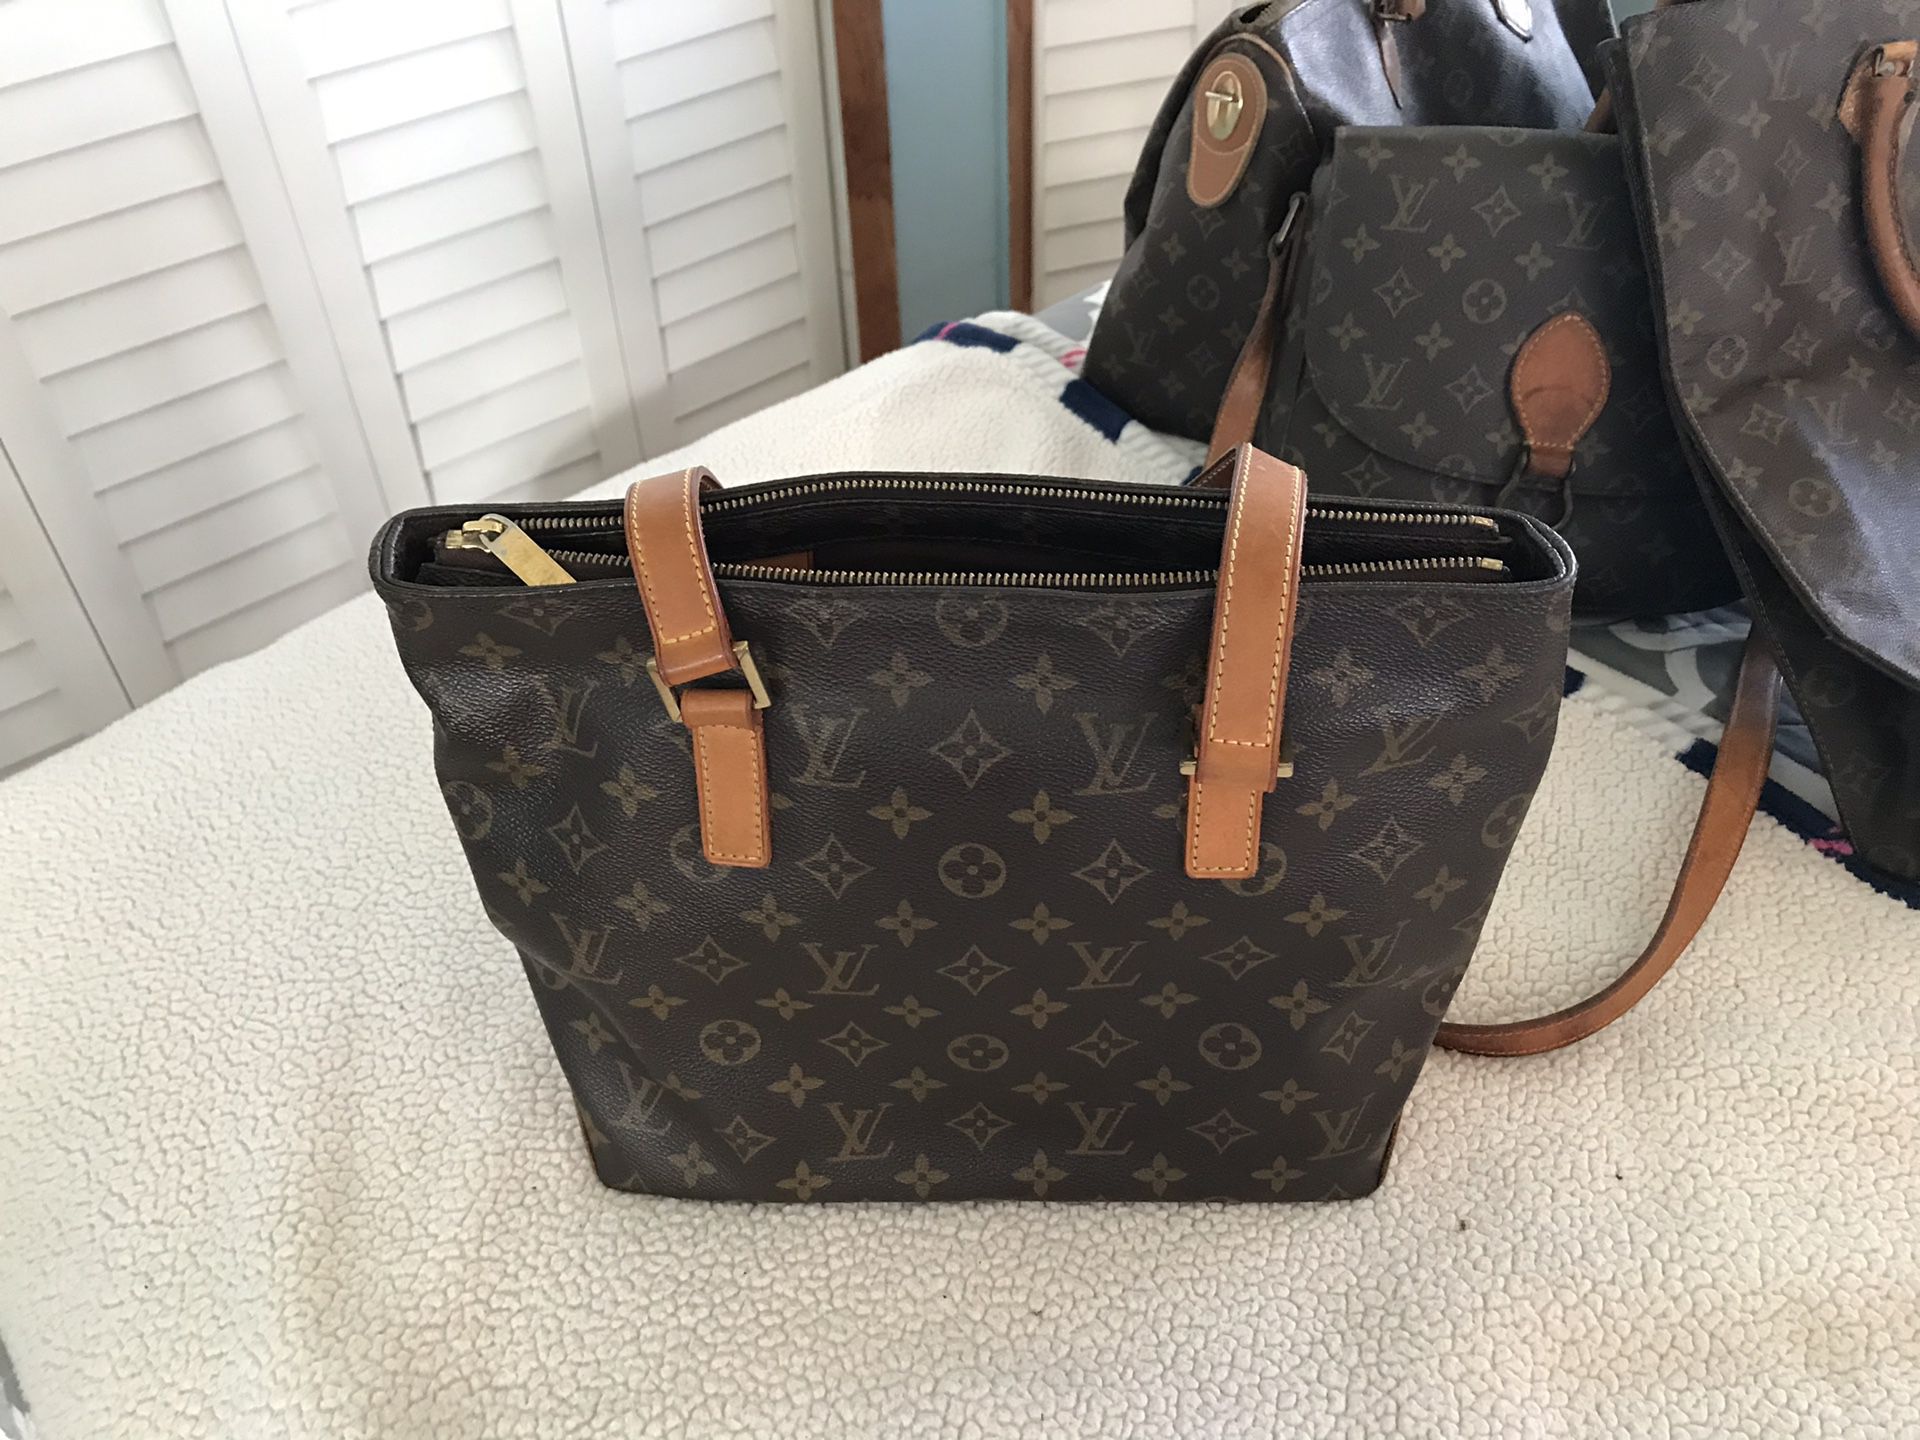 Authentic Louis Vuitton canas piano bag for Sale in Miami, FL